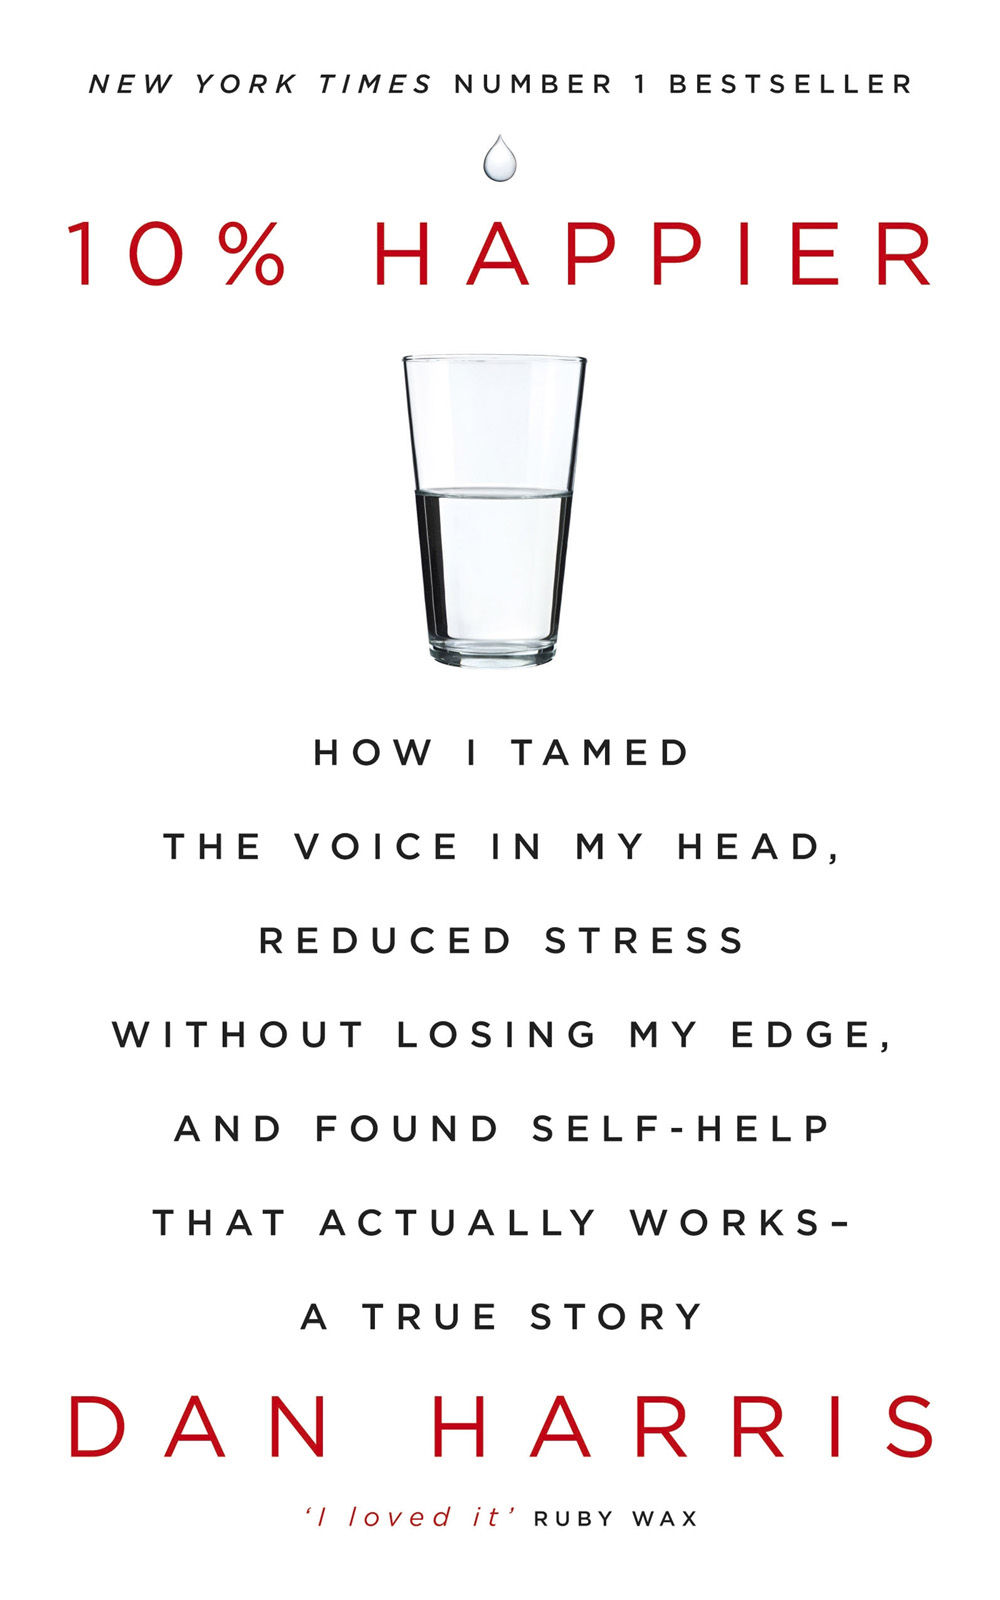 Harris Dan - 10% Happier: How I Tamed the Voice in My Head, Reduced Stress Without Losing My Edge, and Found Self-Help That Actually Works—A True Story скачать бесплатно